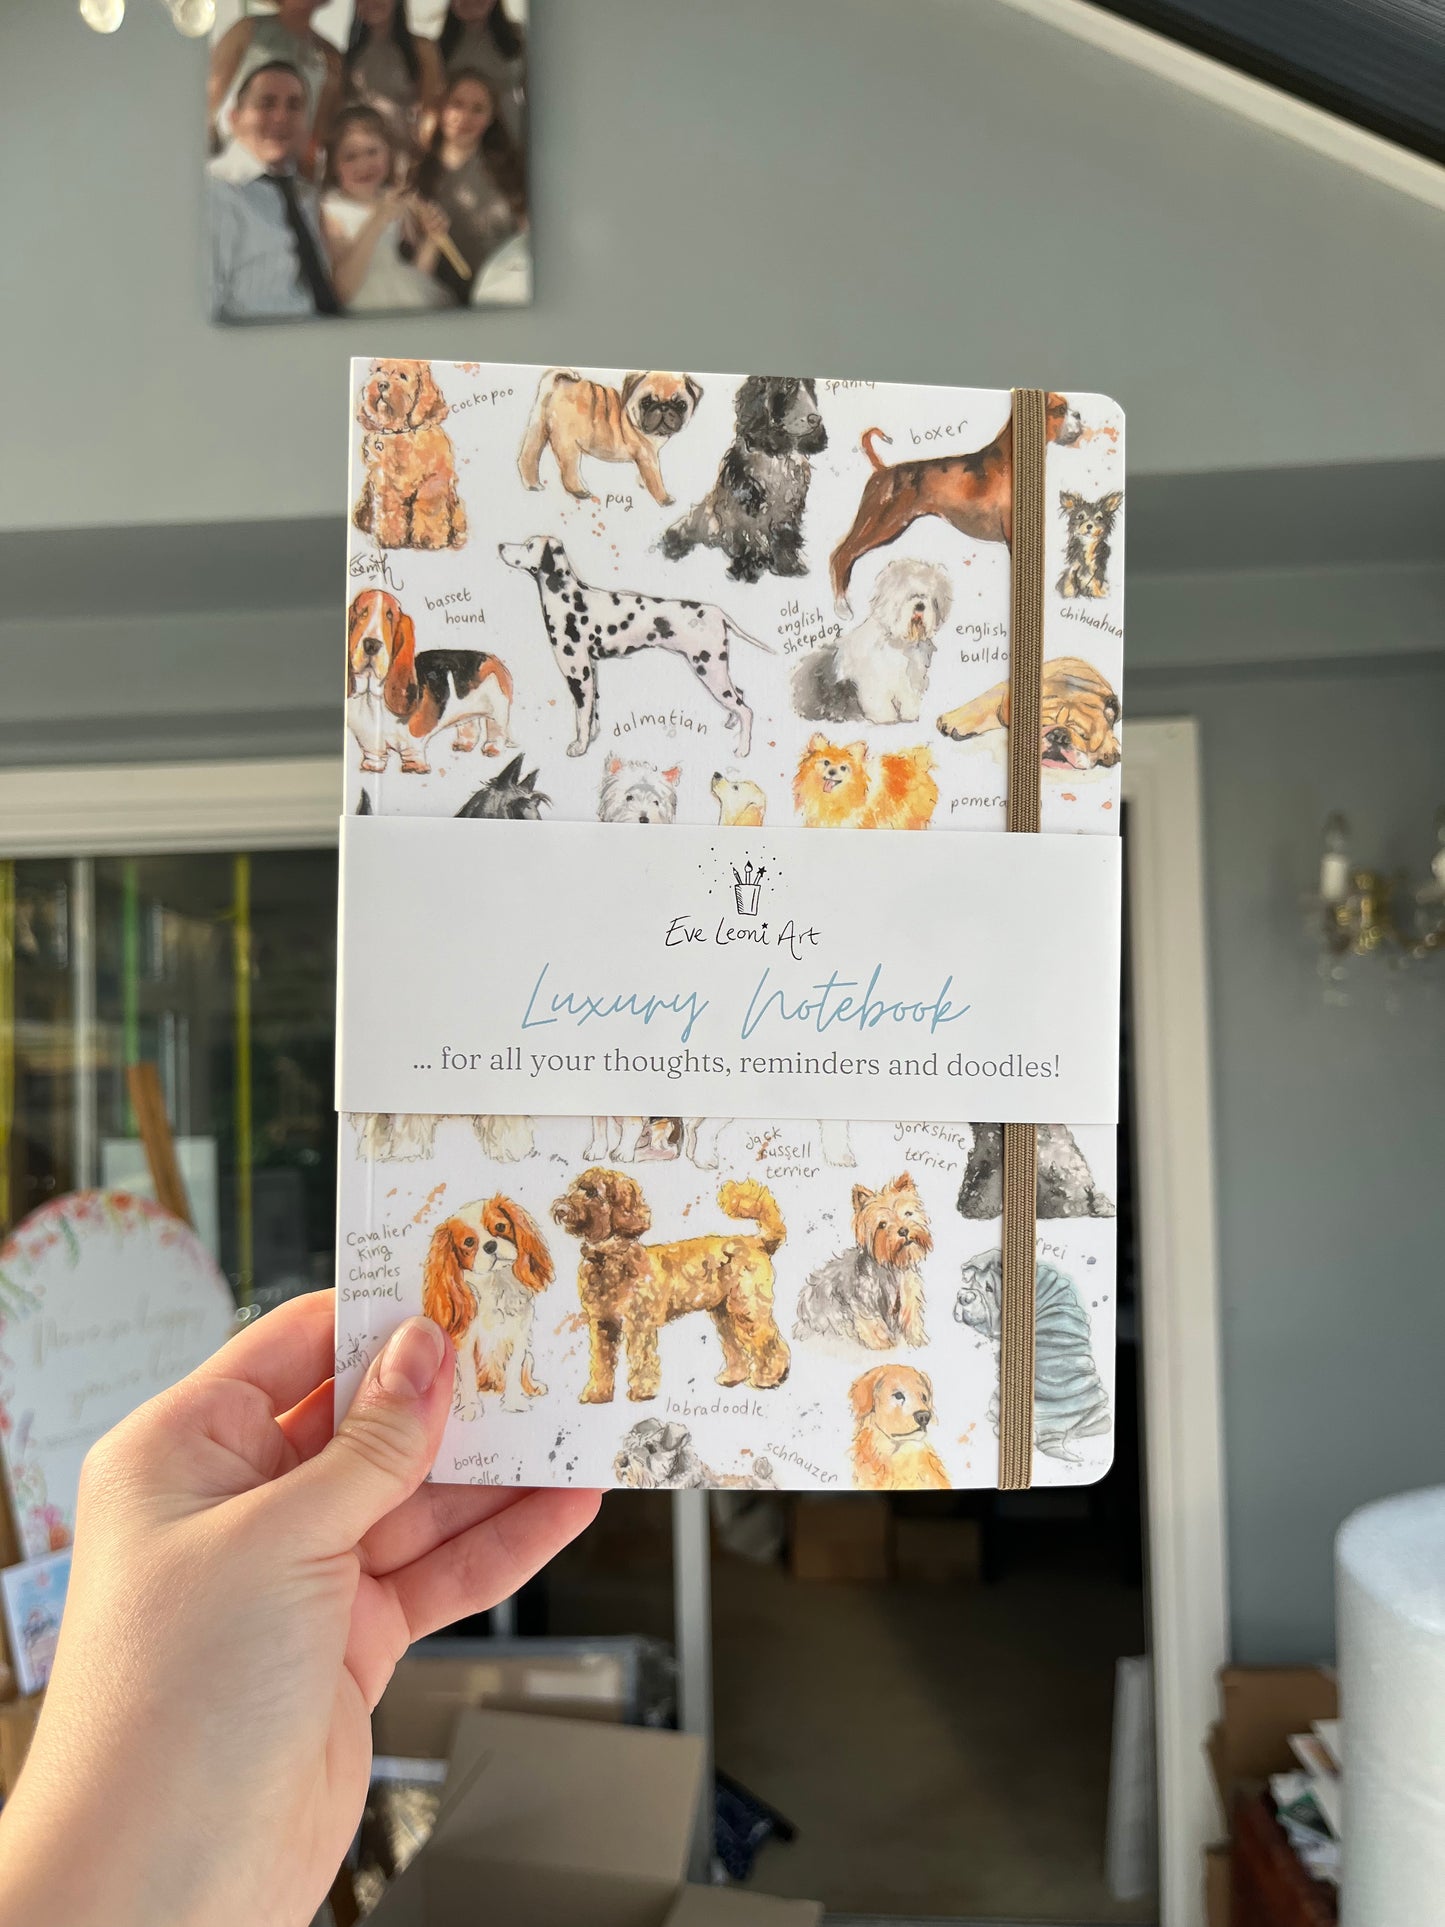 A luxury notebook designed by Lincolnshire based artist, Eve Leoni Smith, featuring watercolour illustrations of different dog breeds.